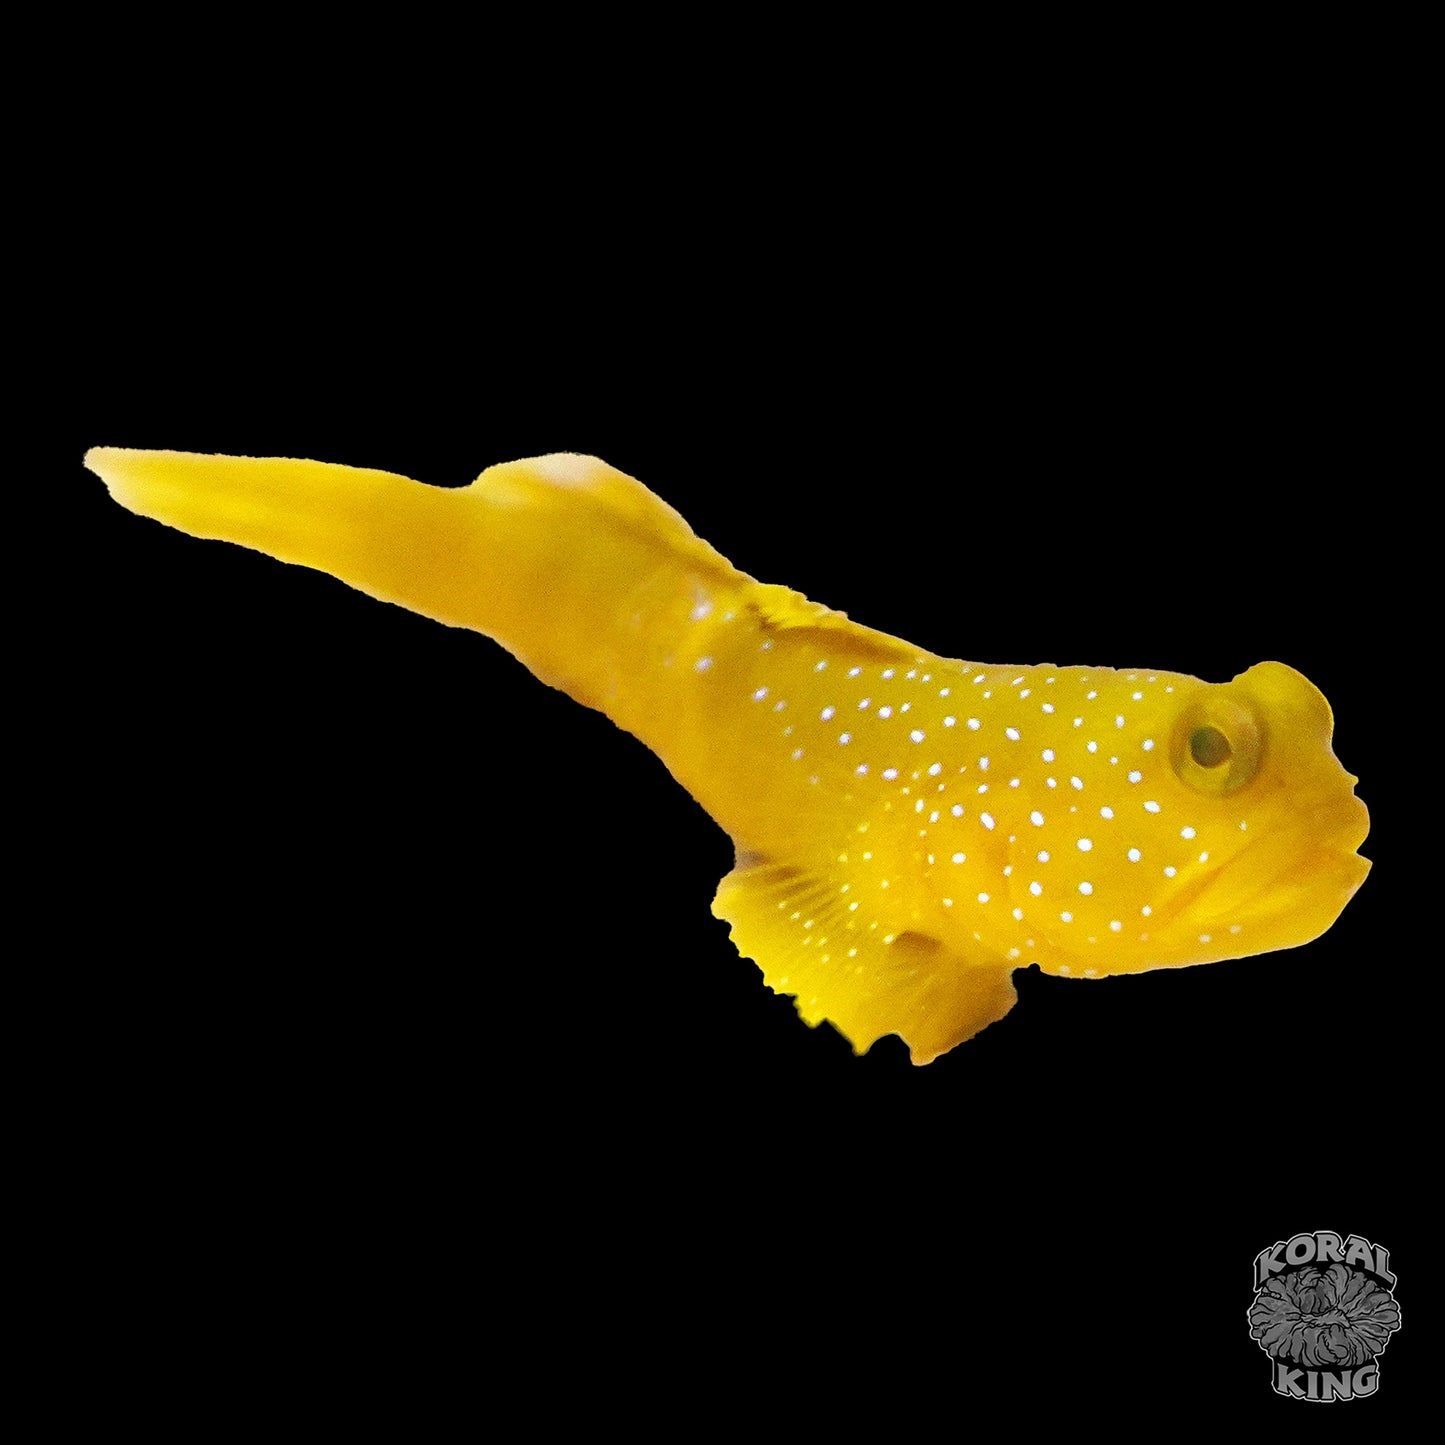 Yellow Watchman Goby - Koral King